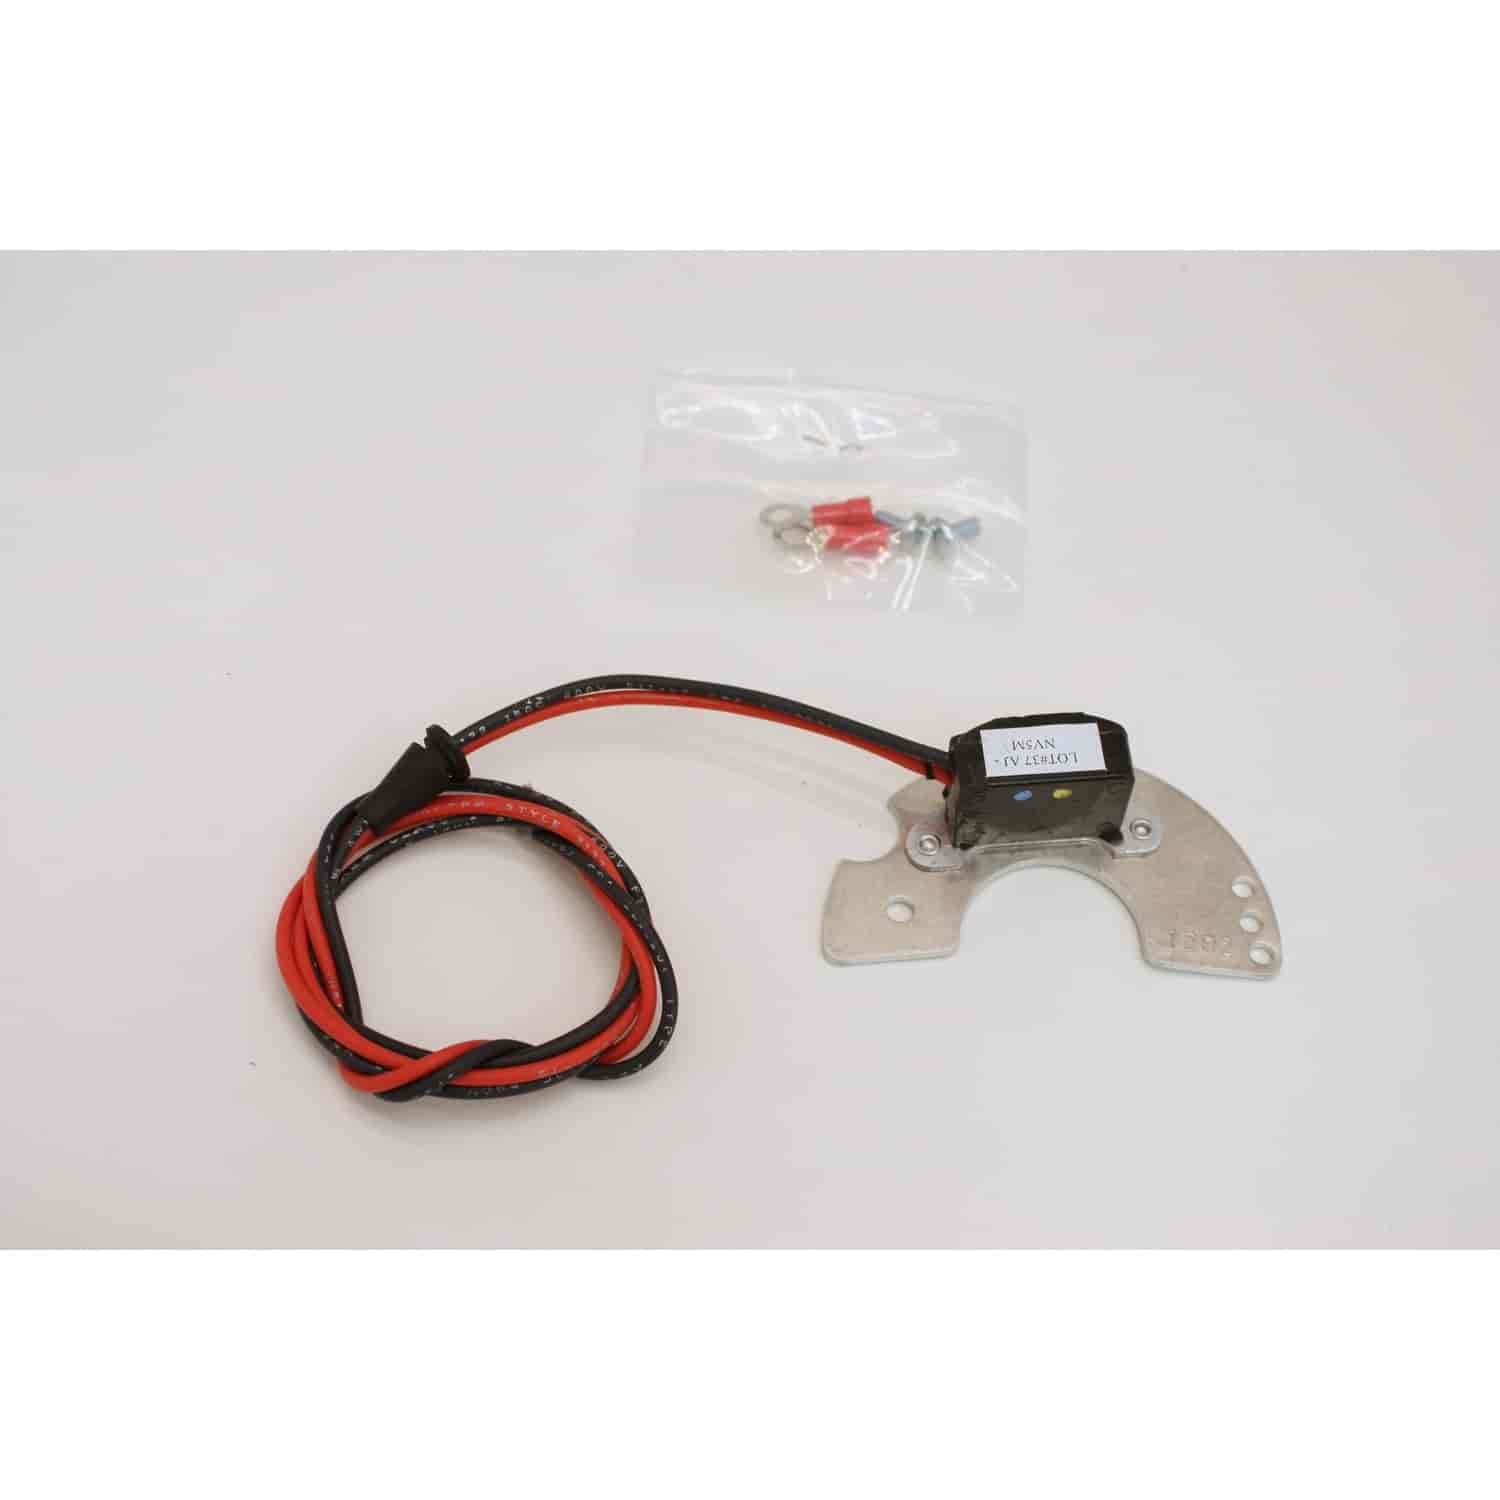 Replacement Module Fits: 751-1282